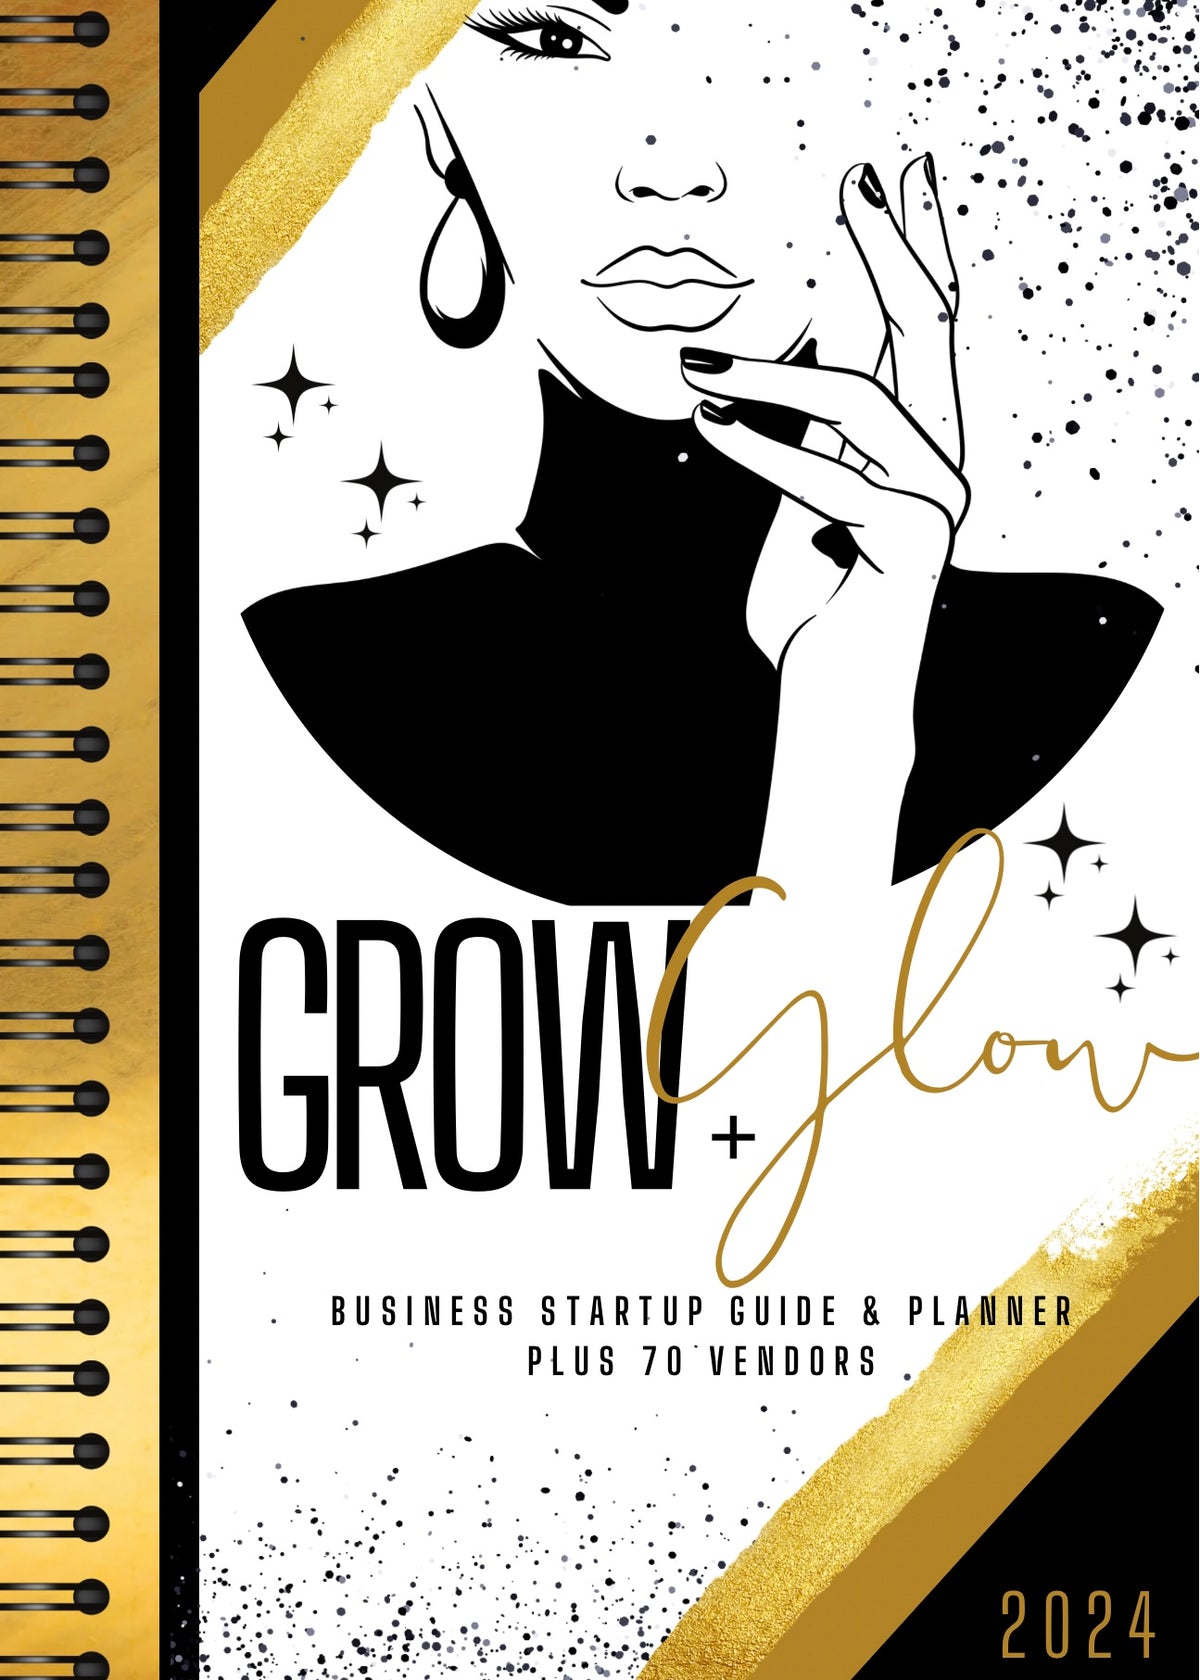 Grow & Glow Business Startup Guide and Planner Plus Vendor List